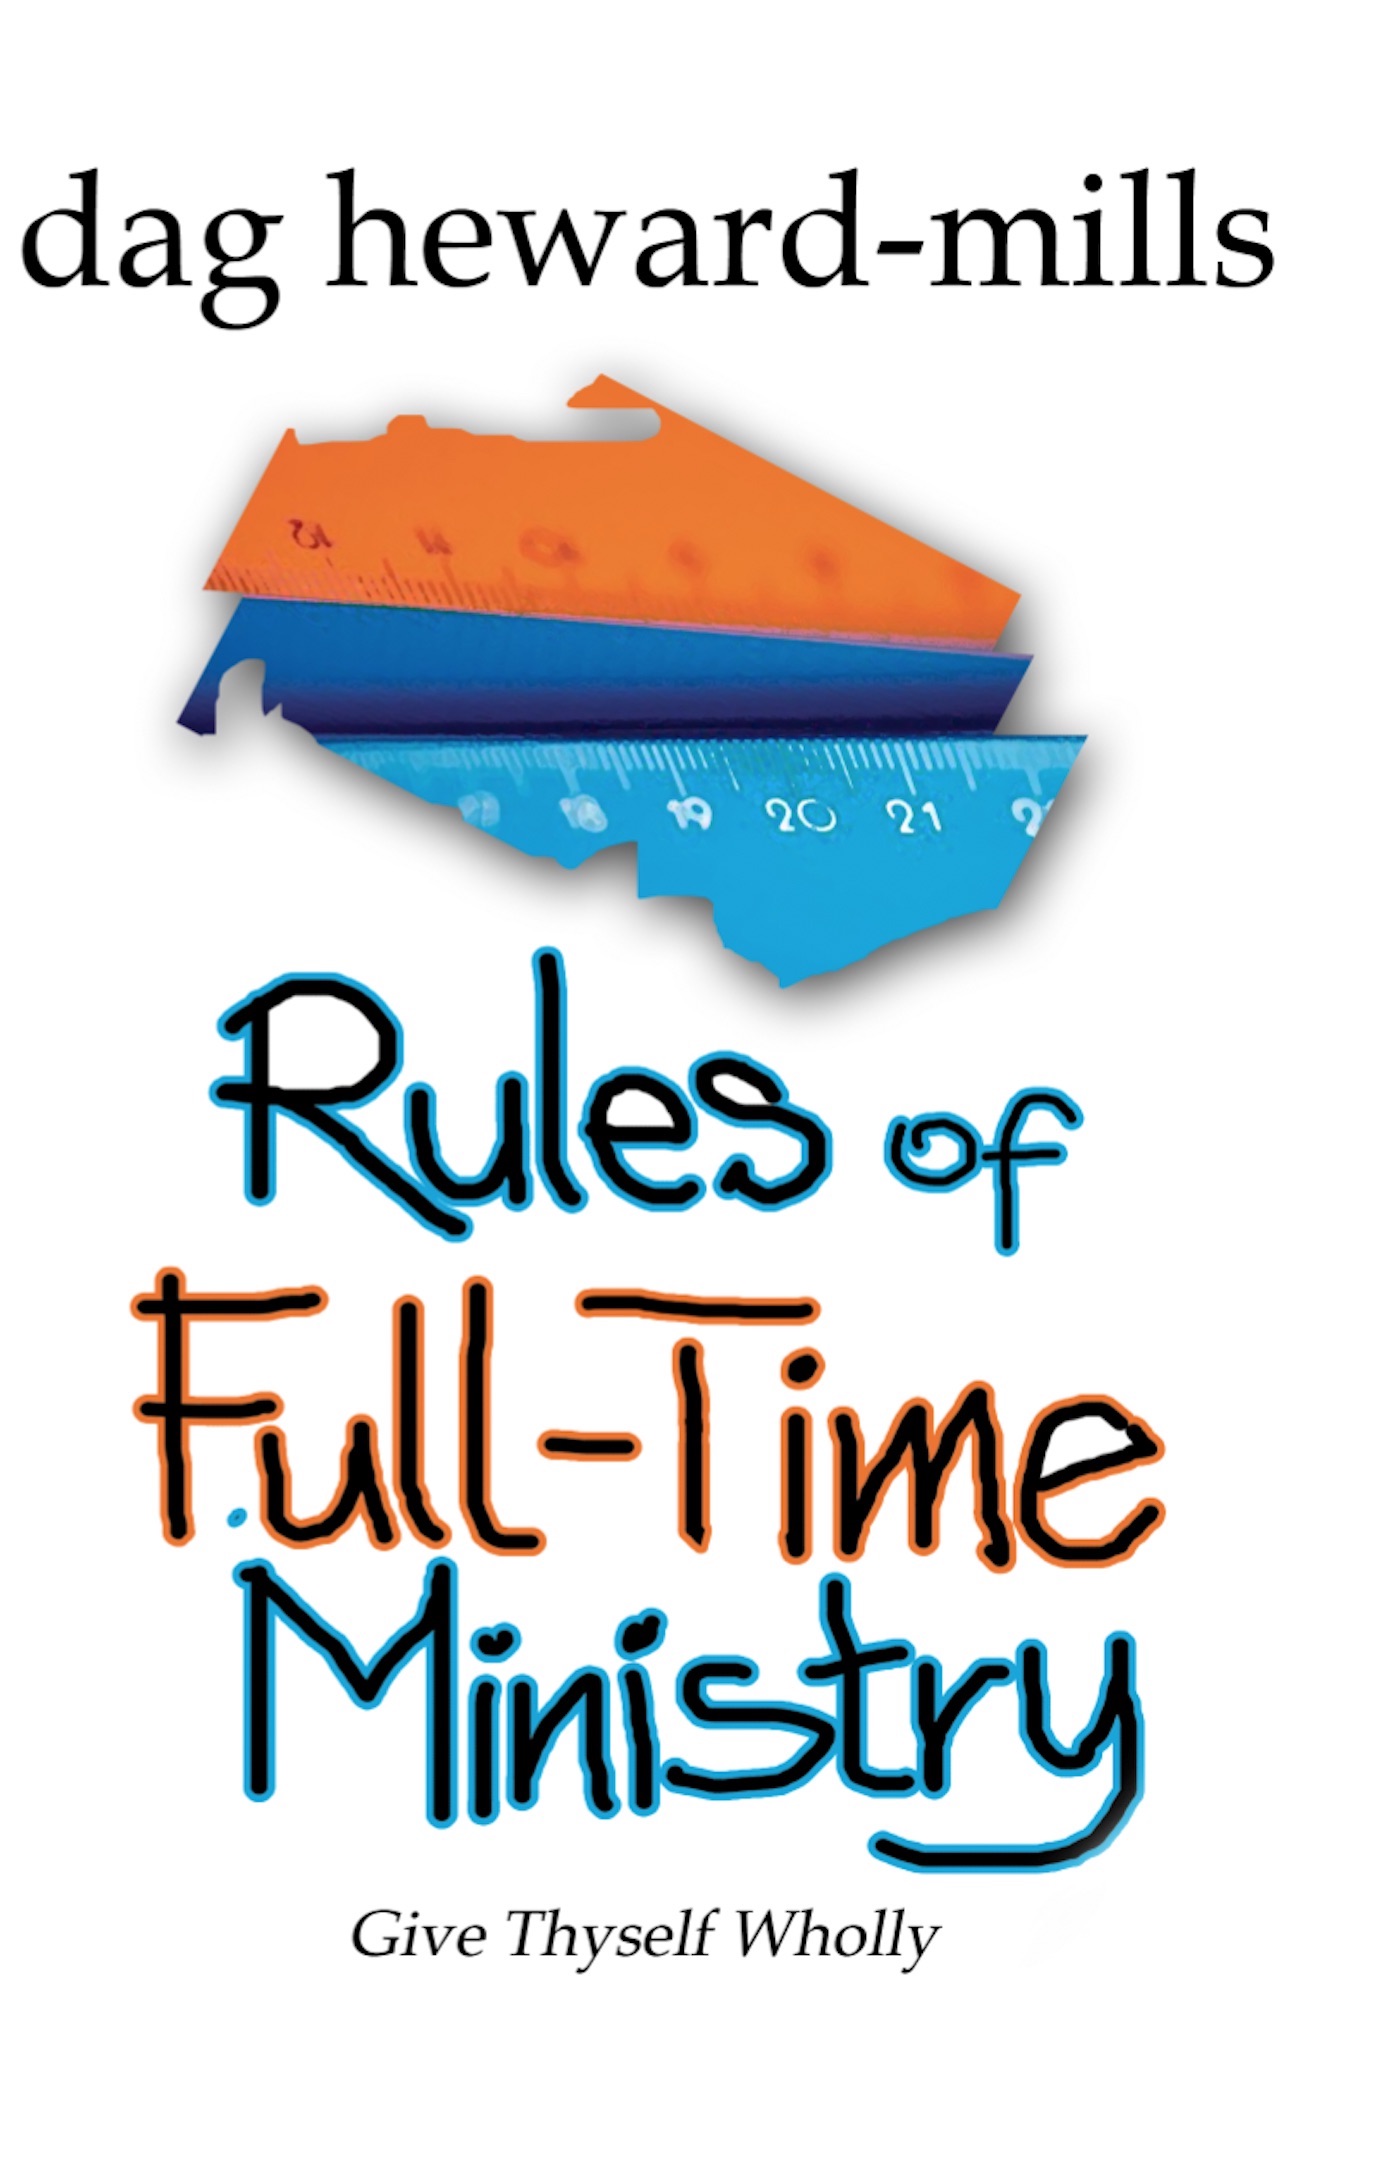 rules of full time ministry_Dag Heward-Mills